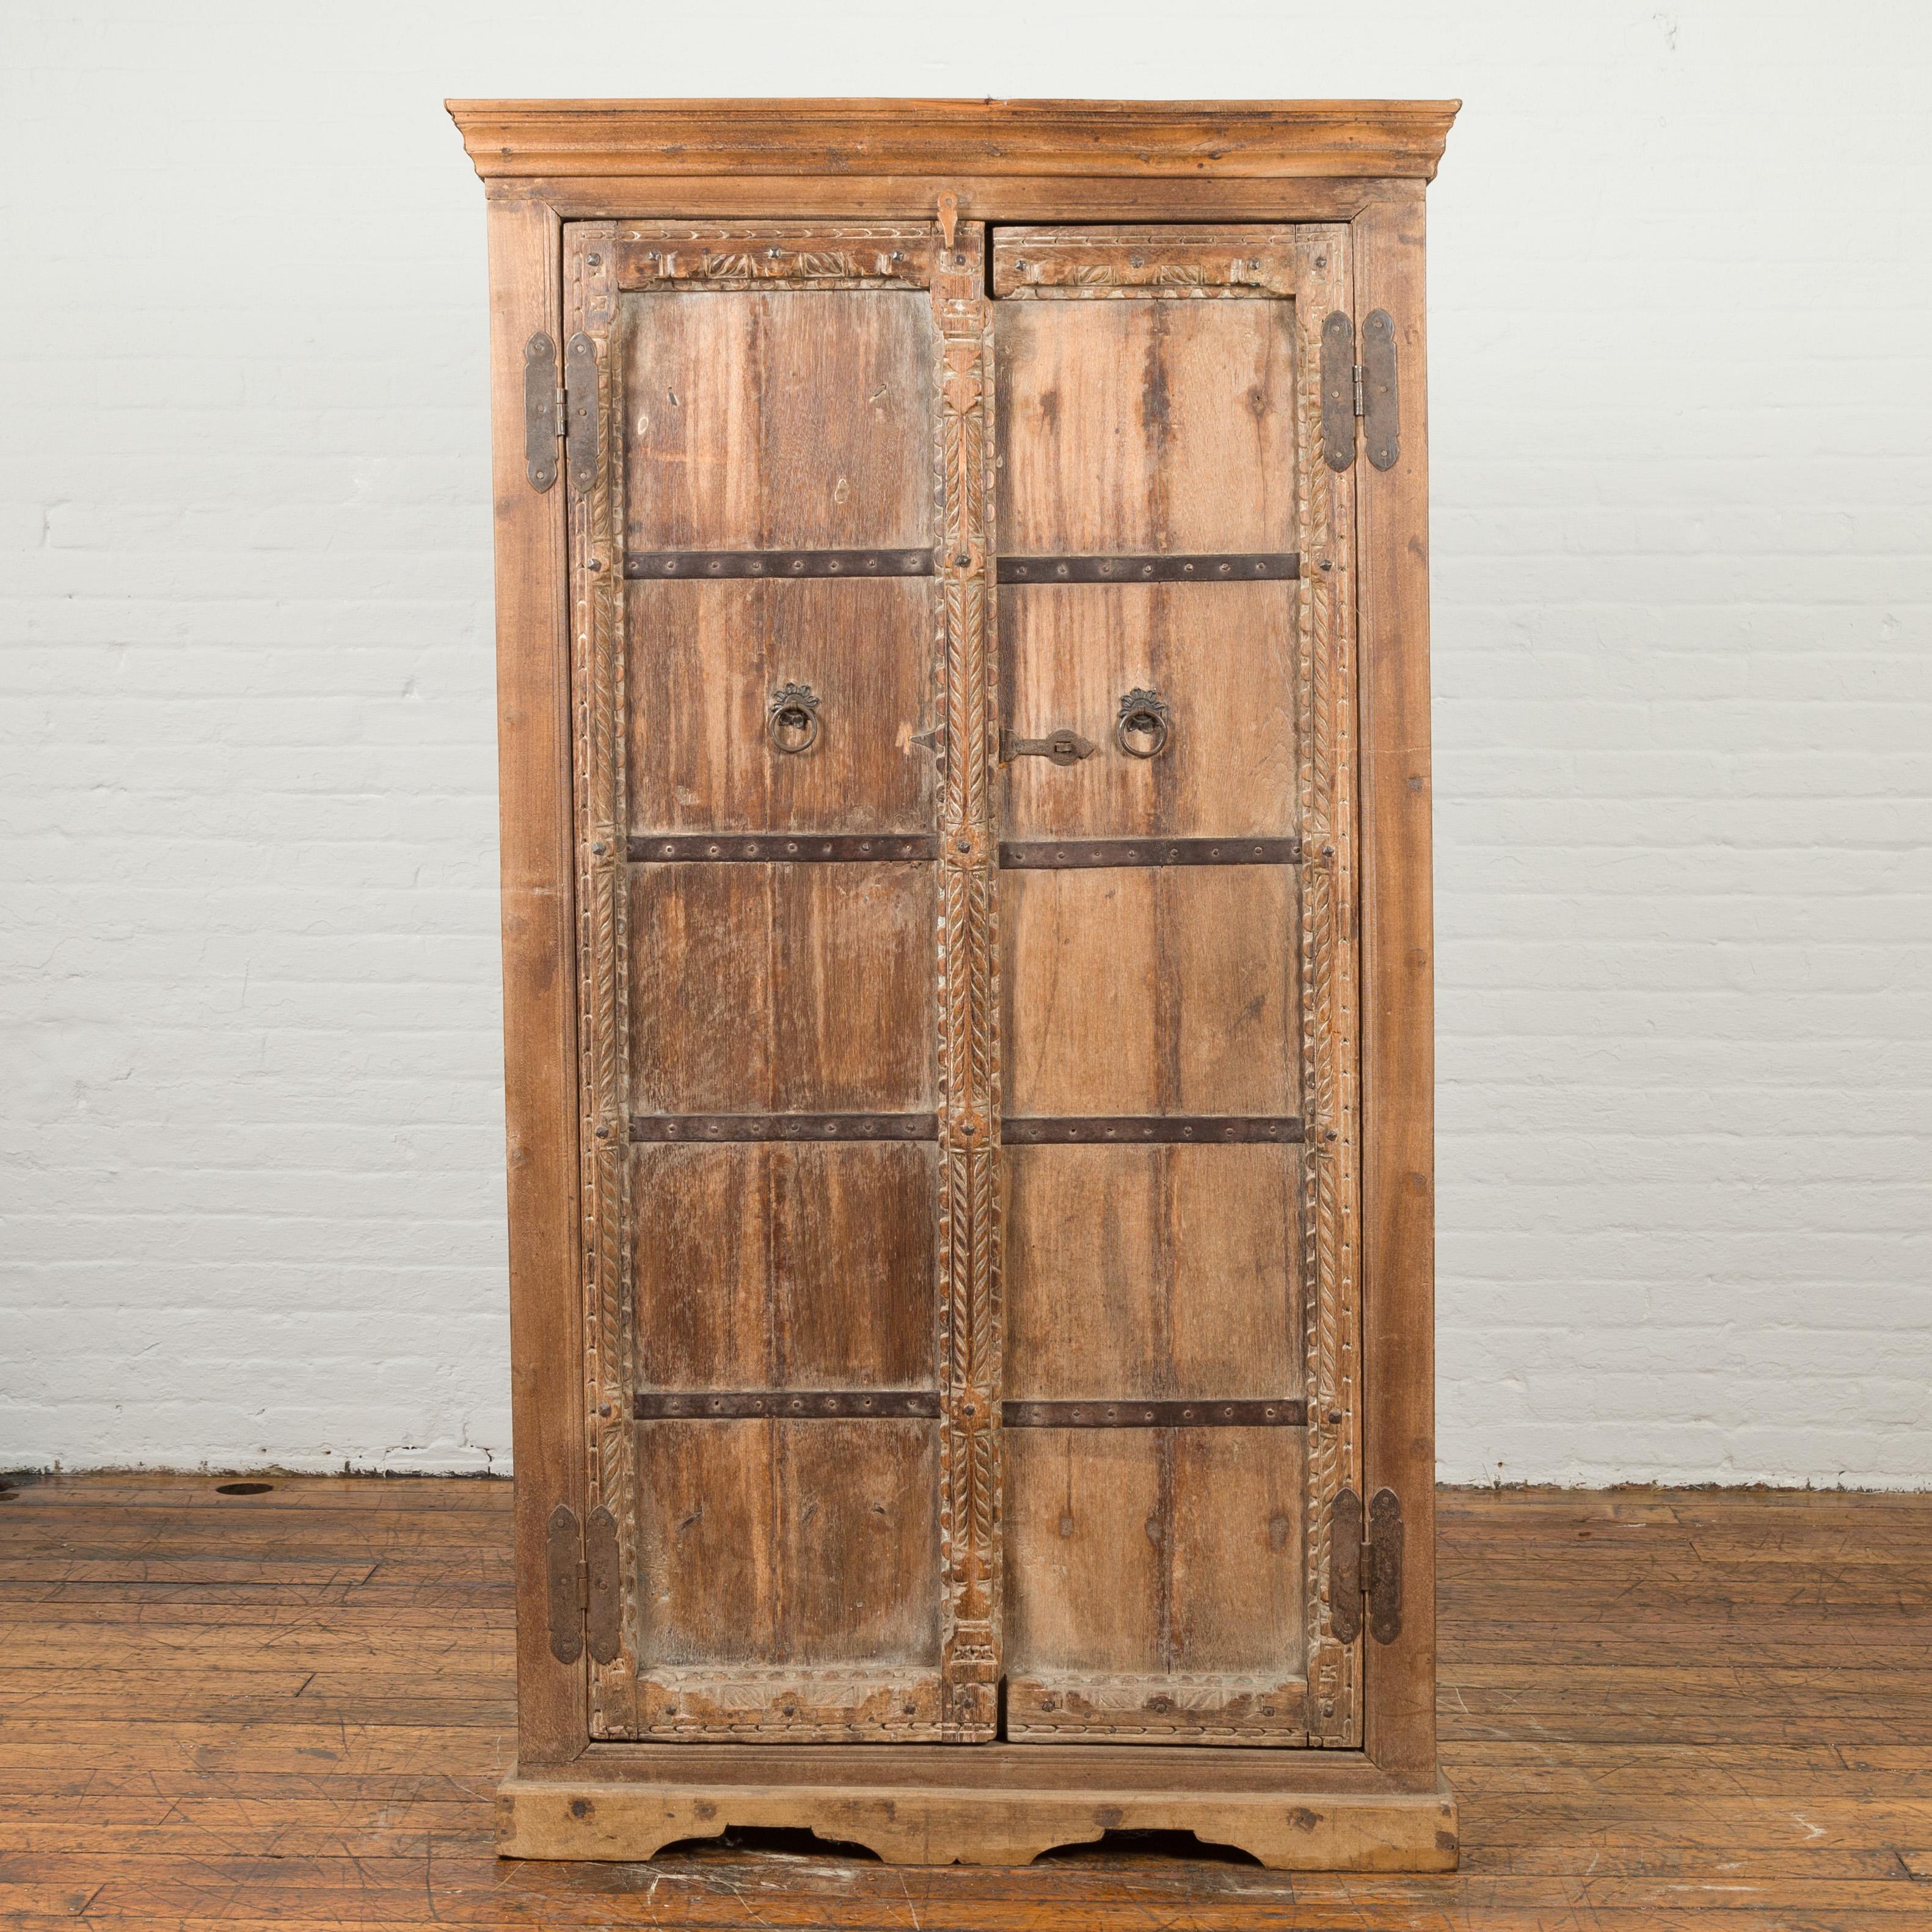 An Indian sheesham wood cabinet from the 19th century, with distressed patina, carved doors and iron accents. Created in India during the 19th century, this sheesham wood tall cabinet features a molded cornice sitting above two carved doors